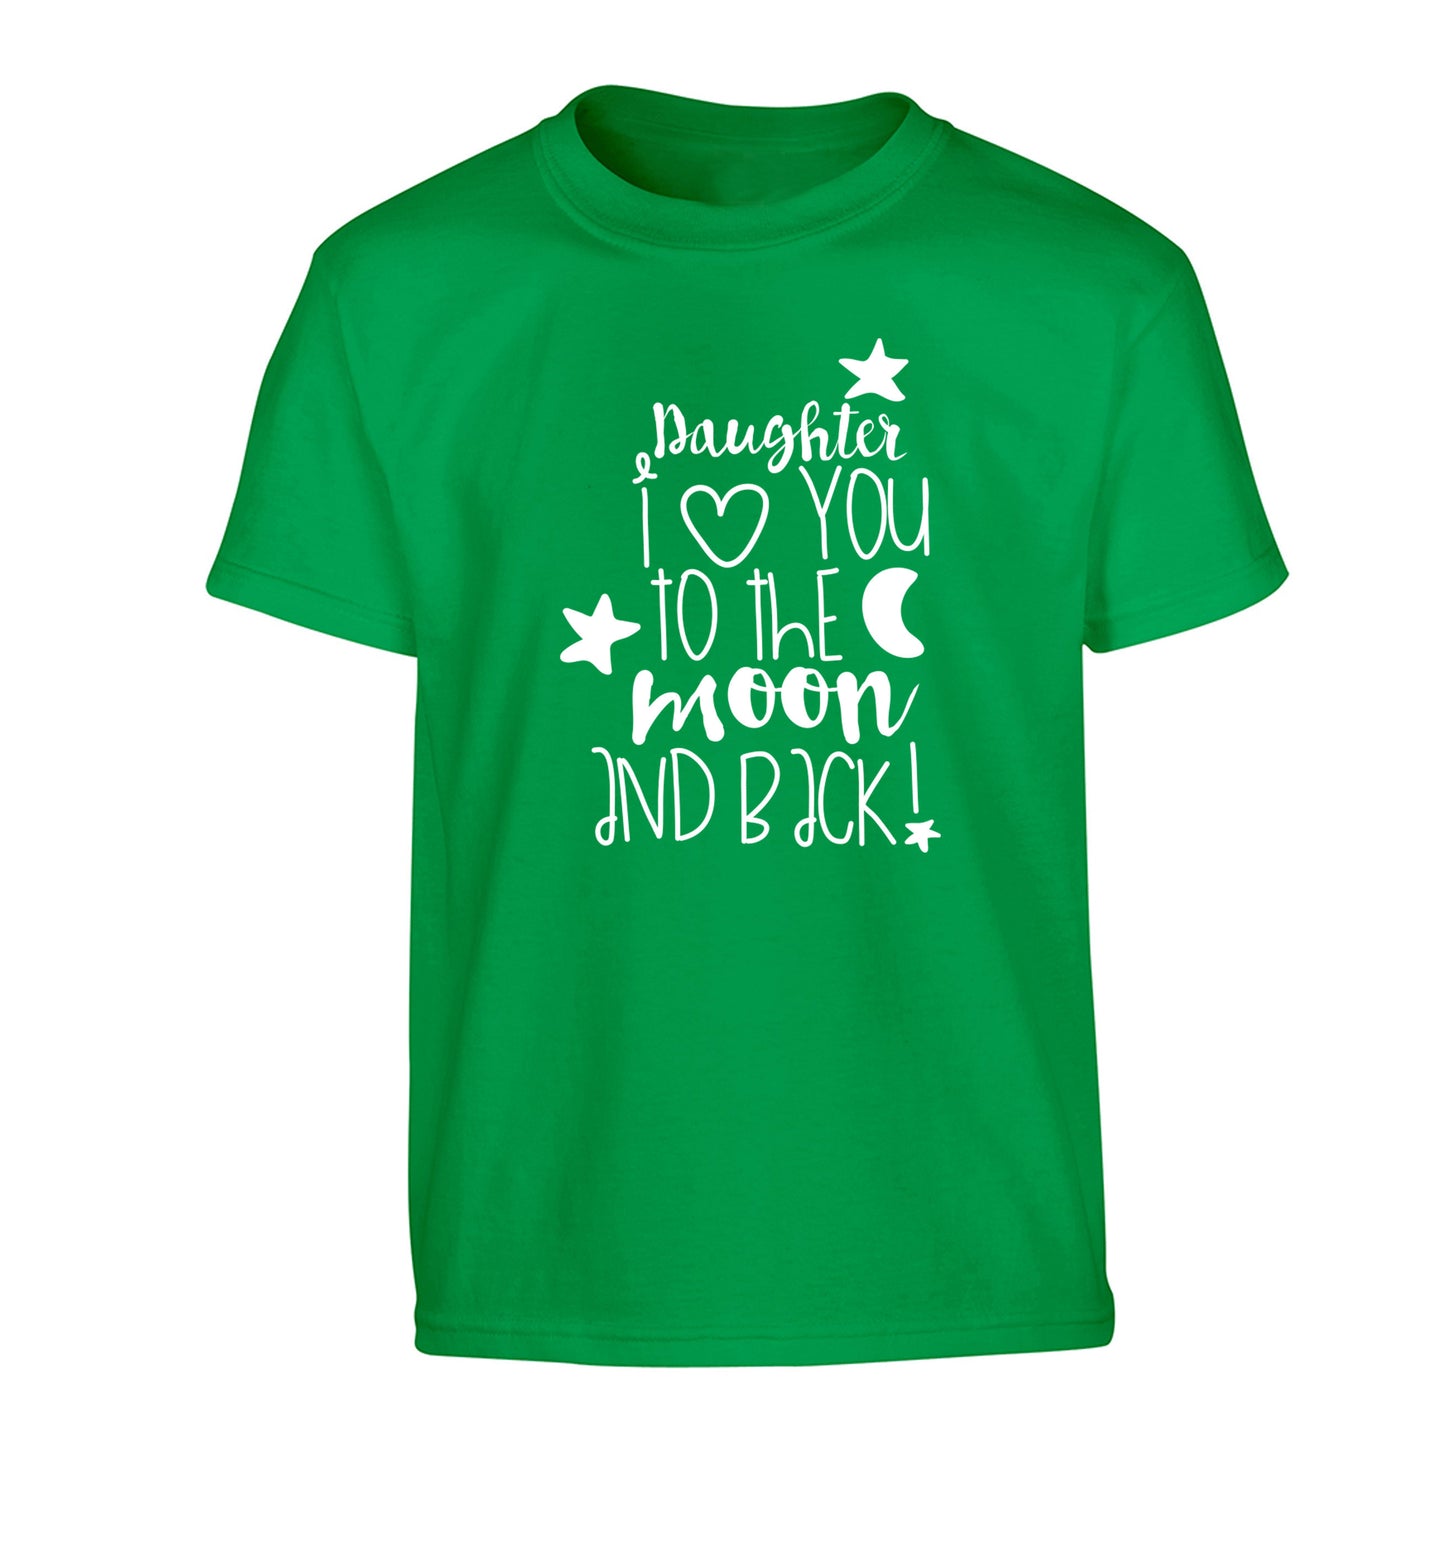 Daughter I love you to the moon and back Children's green Tshirt 12-14 Years